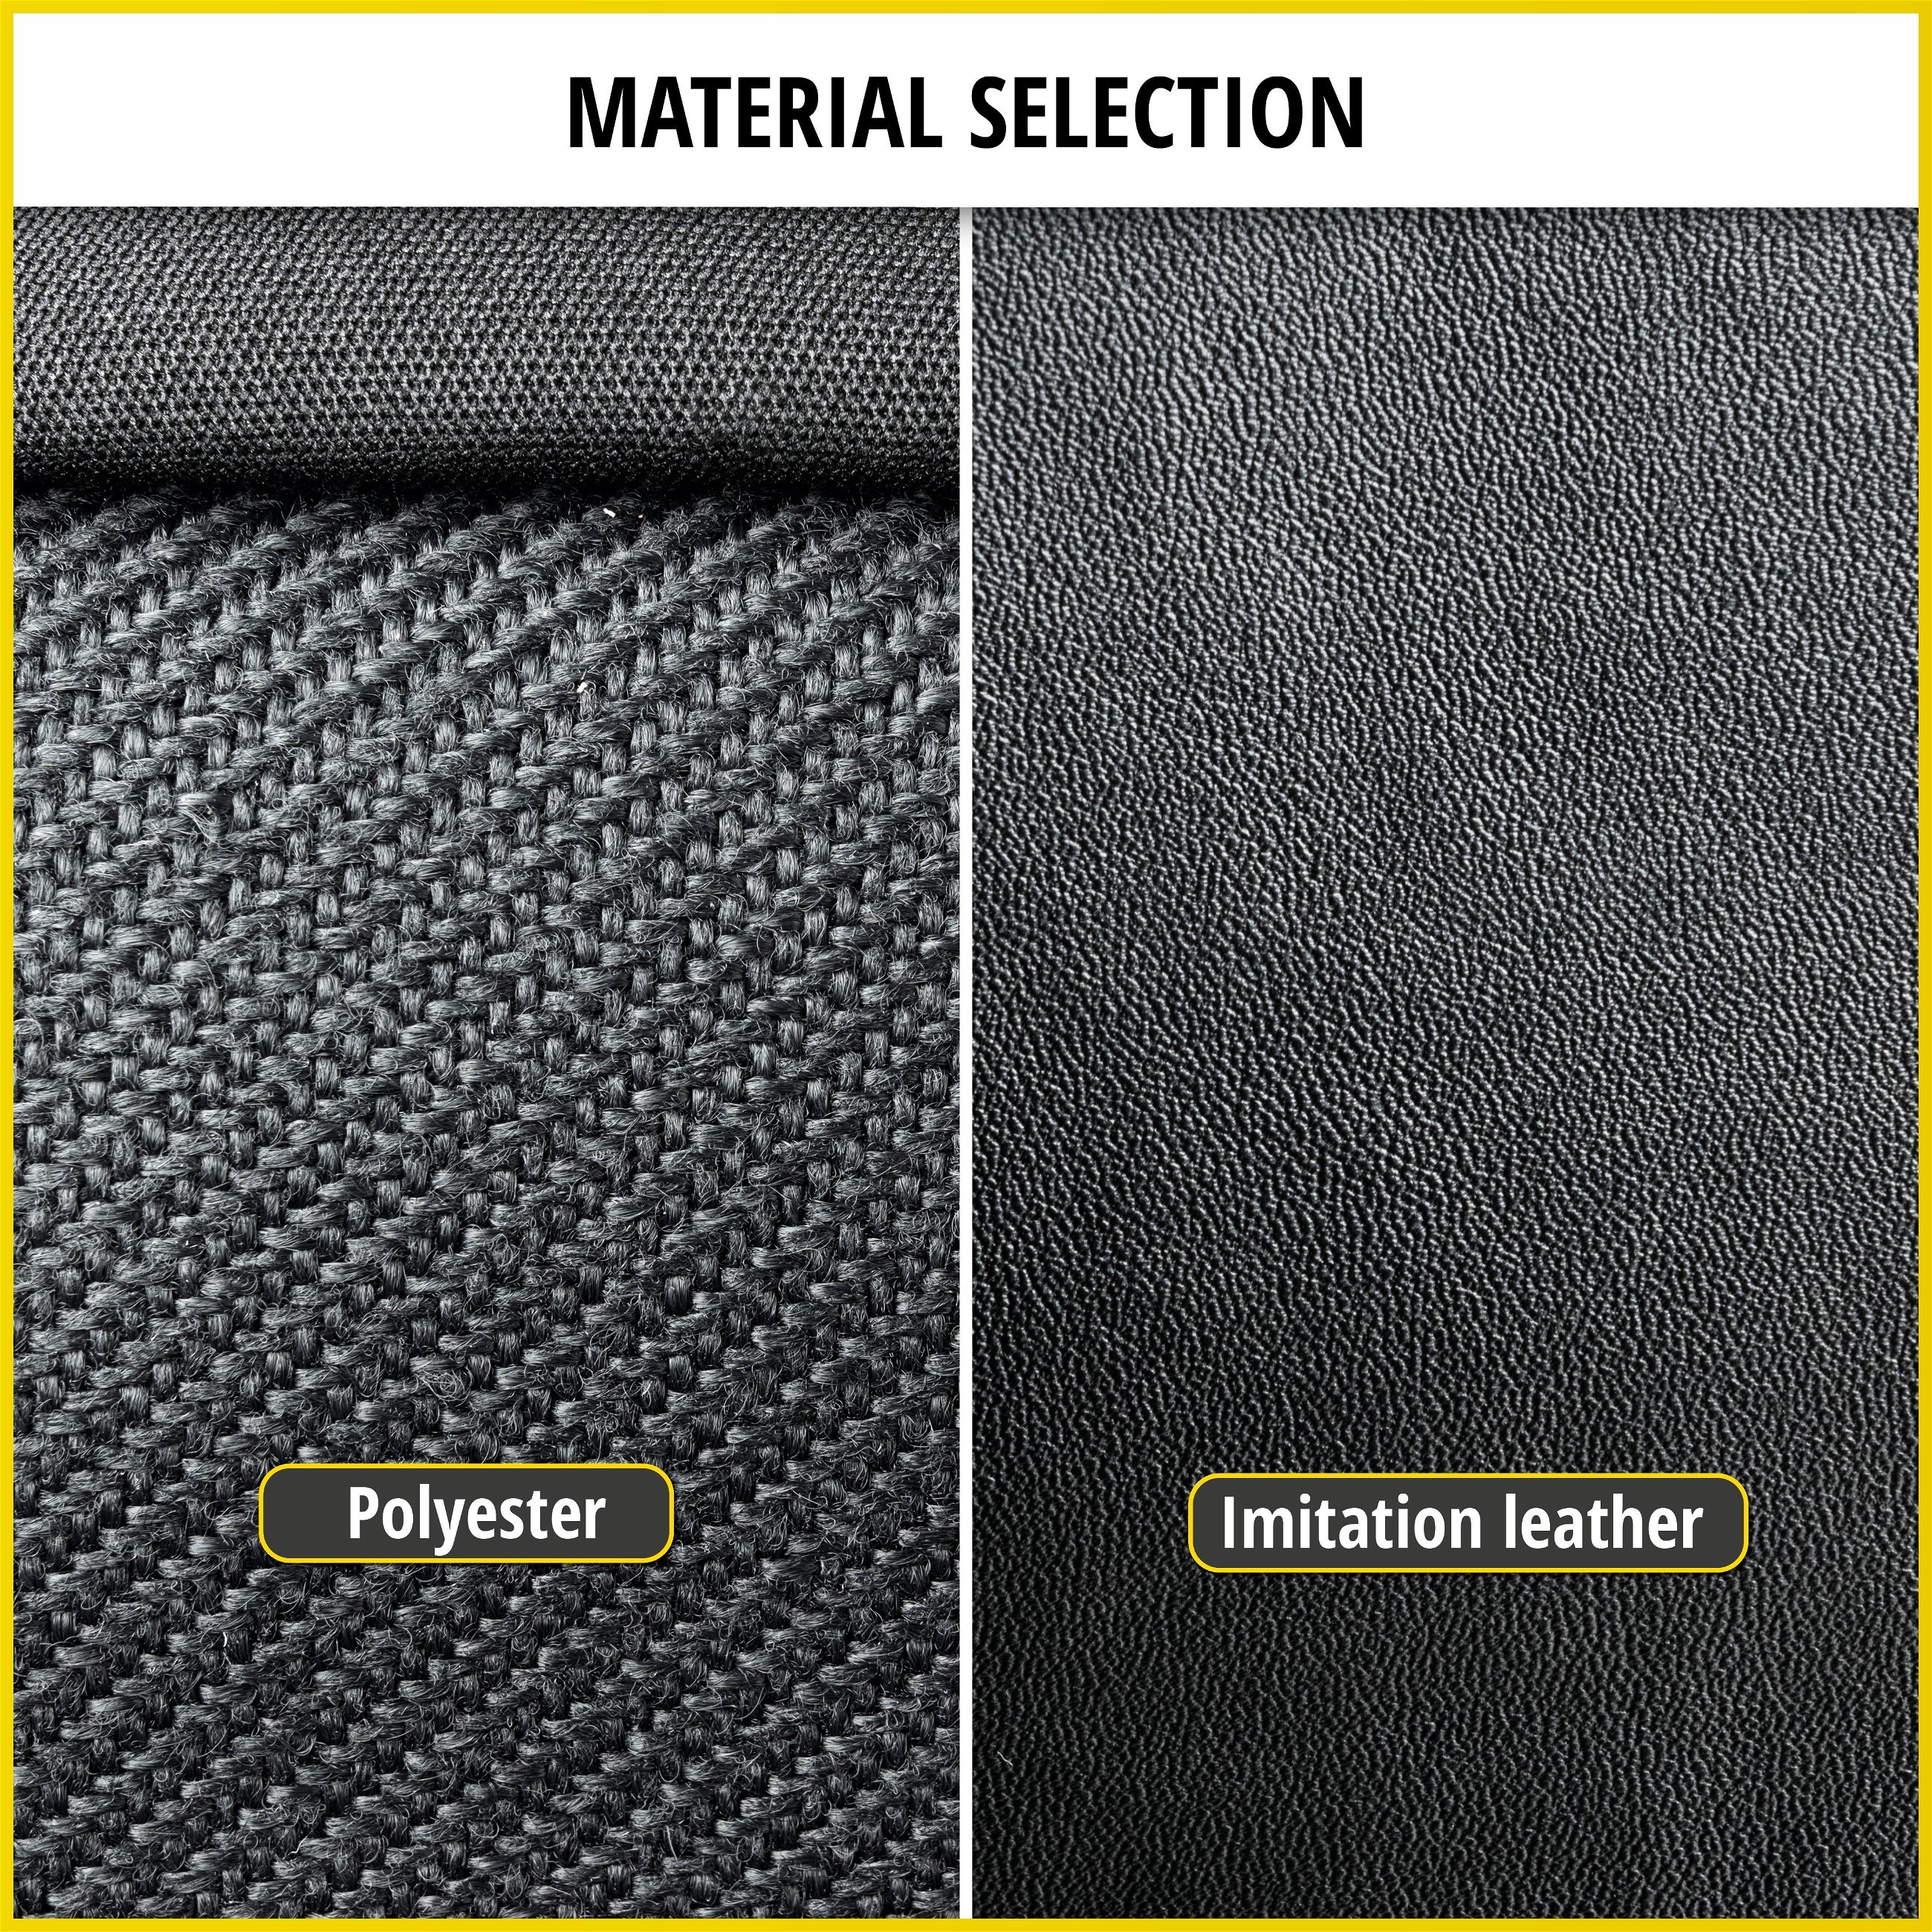 Seat cover made of fabric for Mercedes Vito/Viano, 2 single seat covers for armrest inside + outside